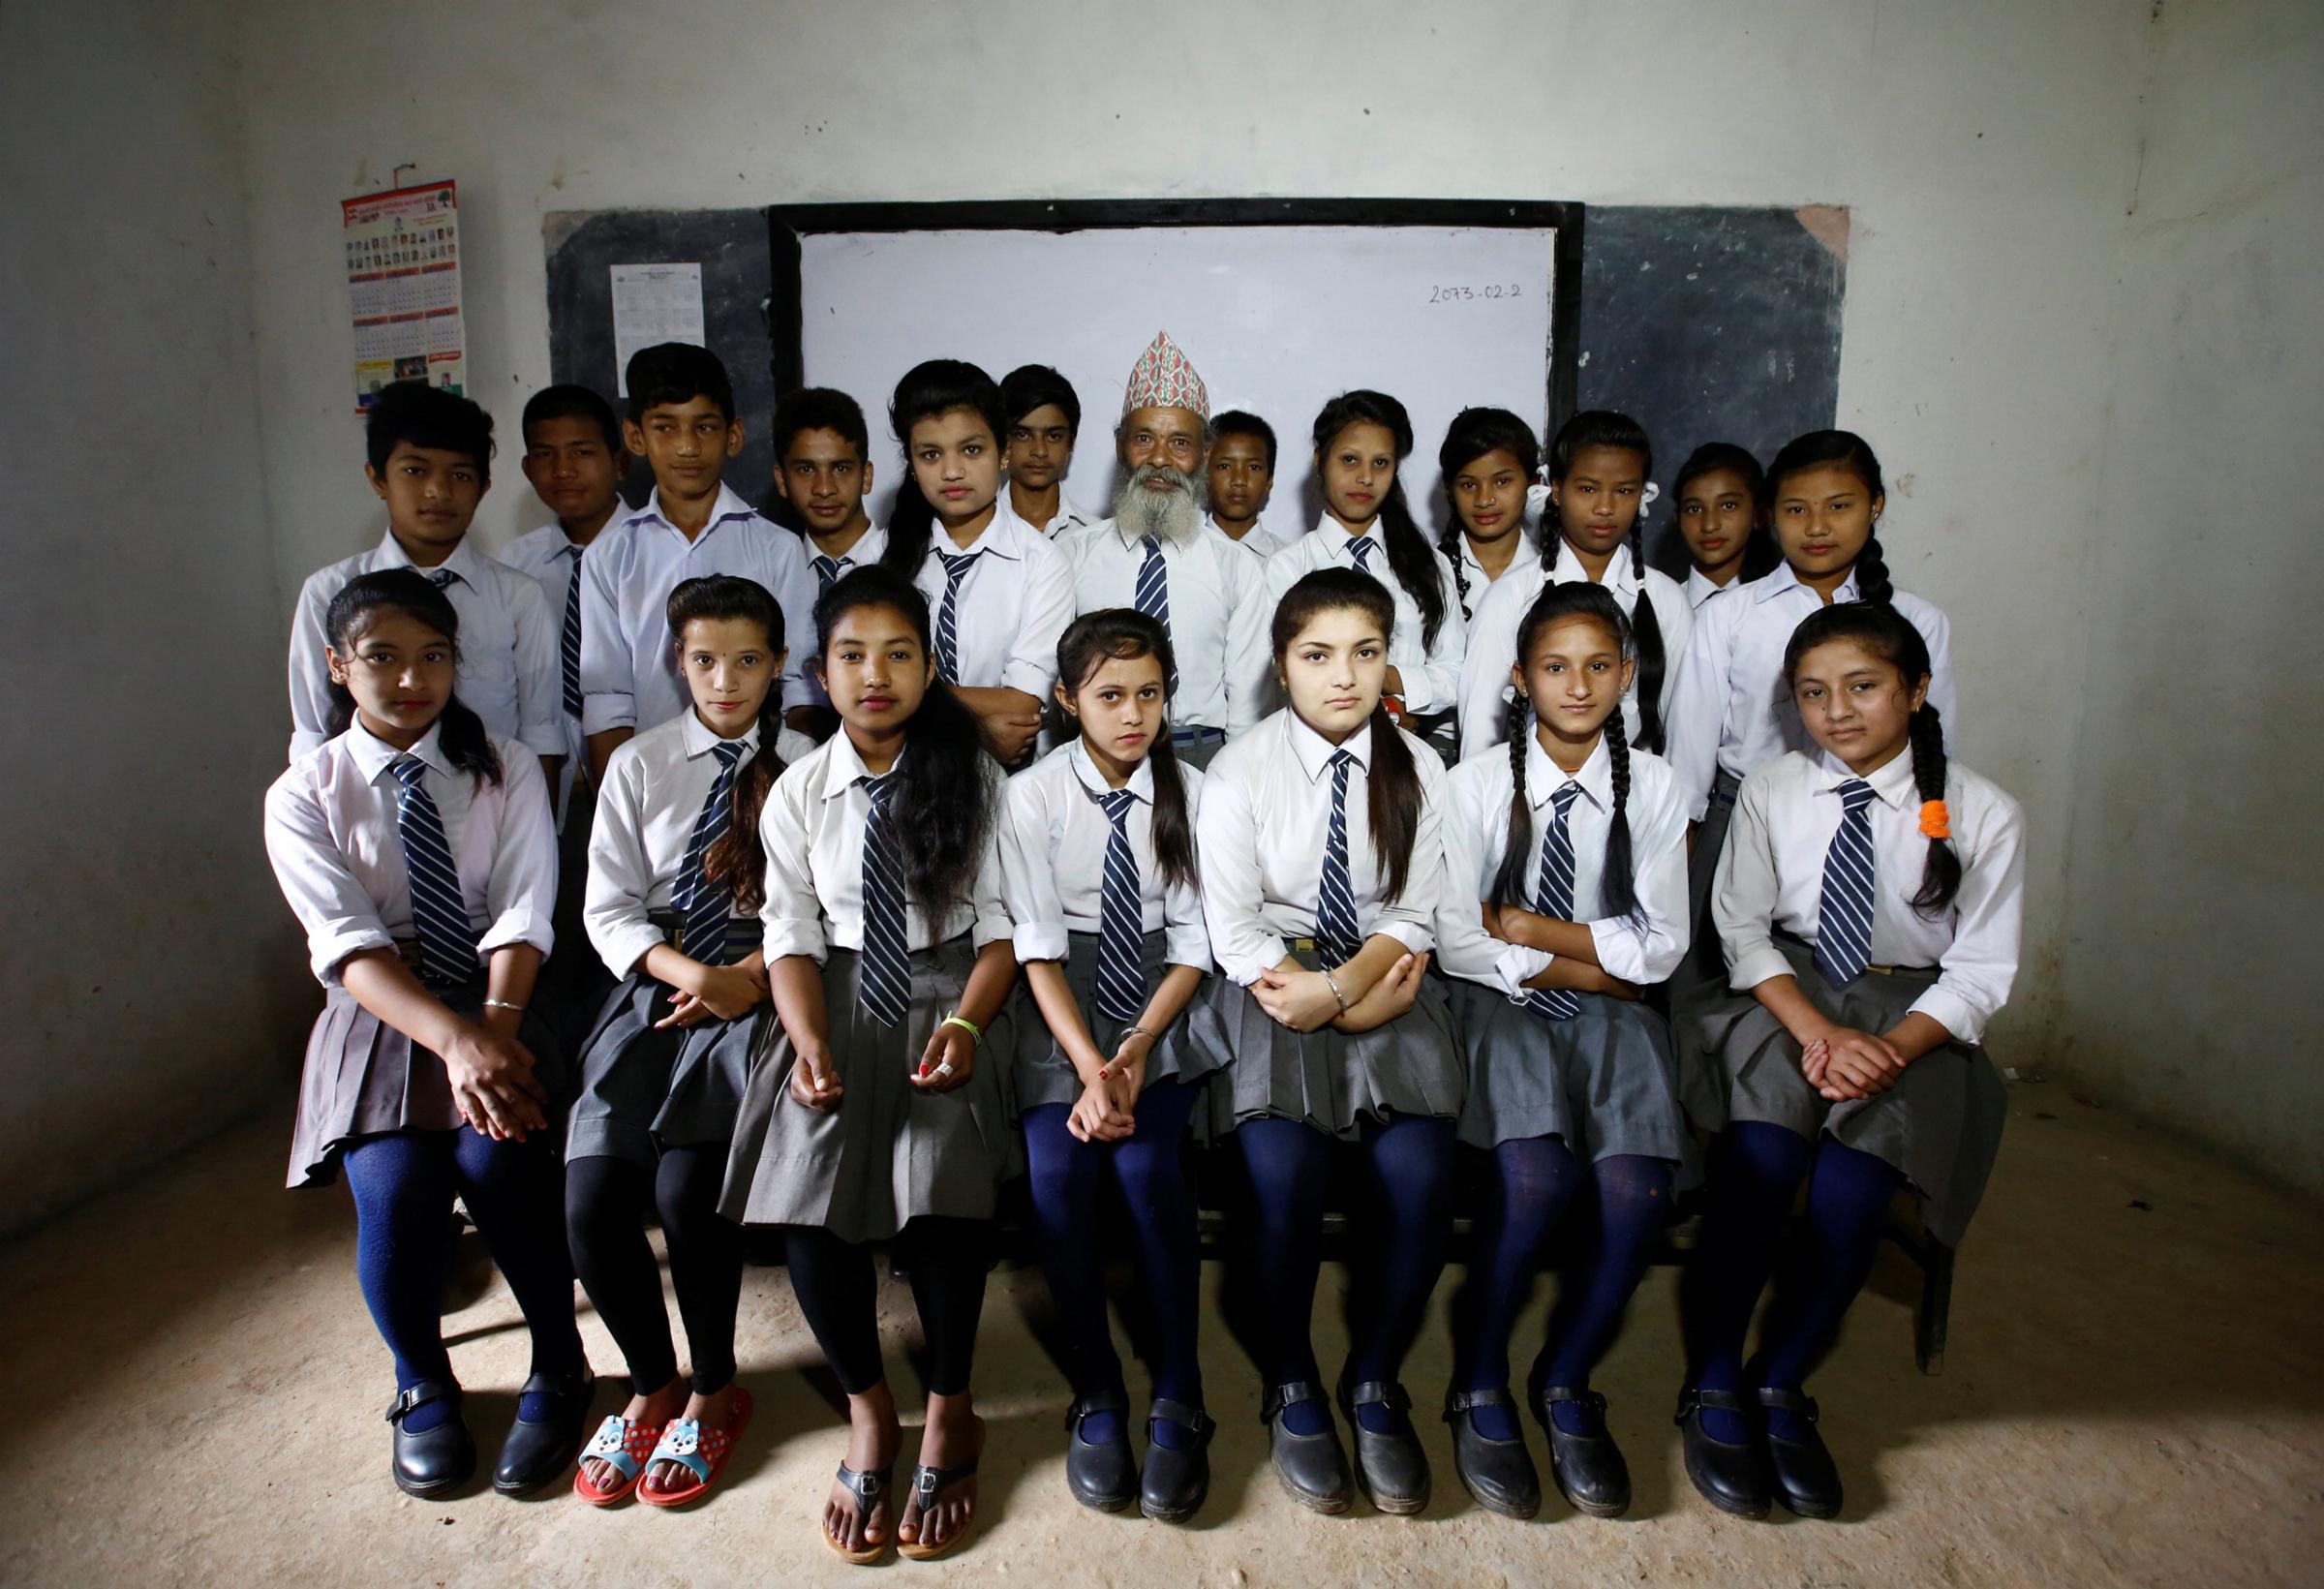 Durga Kami (C), 68, and his classmates pose for a group picture in their classroom at Shree Kala Bhairab Higher Secondary School in Syangja, Nepal, June 5, 2016. REUTERS/Navesh Chitrakar. SEARCH "DURGA KAMI" FOR THIS STORY. SEARCH "THE WIDER IMAGE" FOR ALL STORIES. TPX IMAGES OF THE DAY